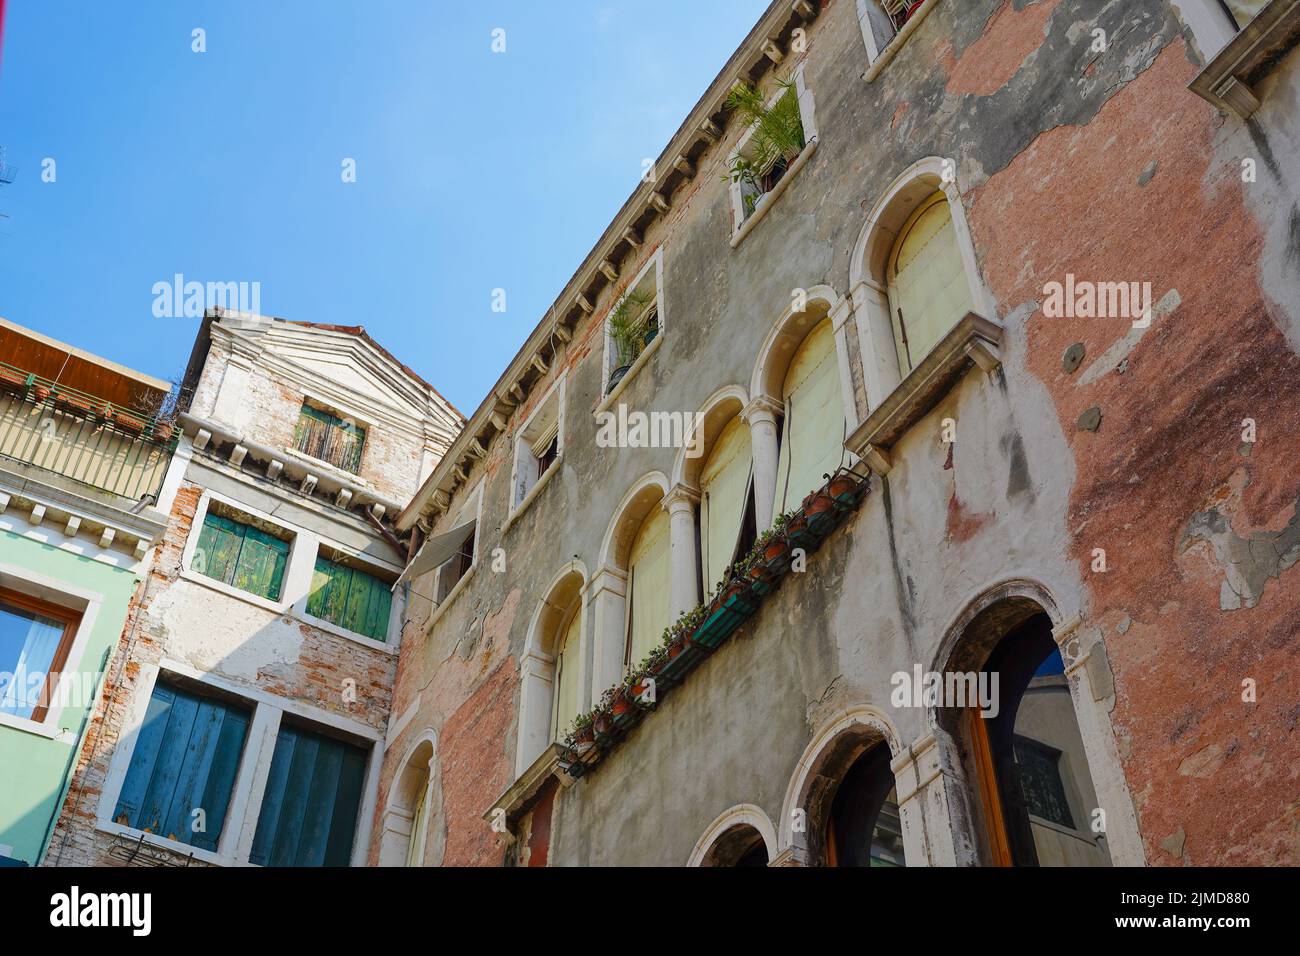 Colorful buildings that are typical in Venice, Italy Stock Photo